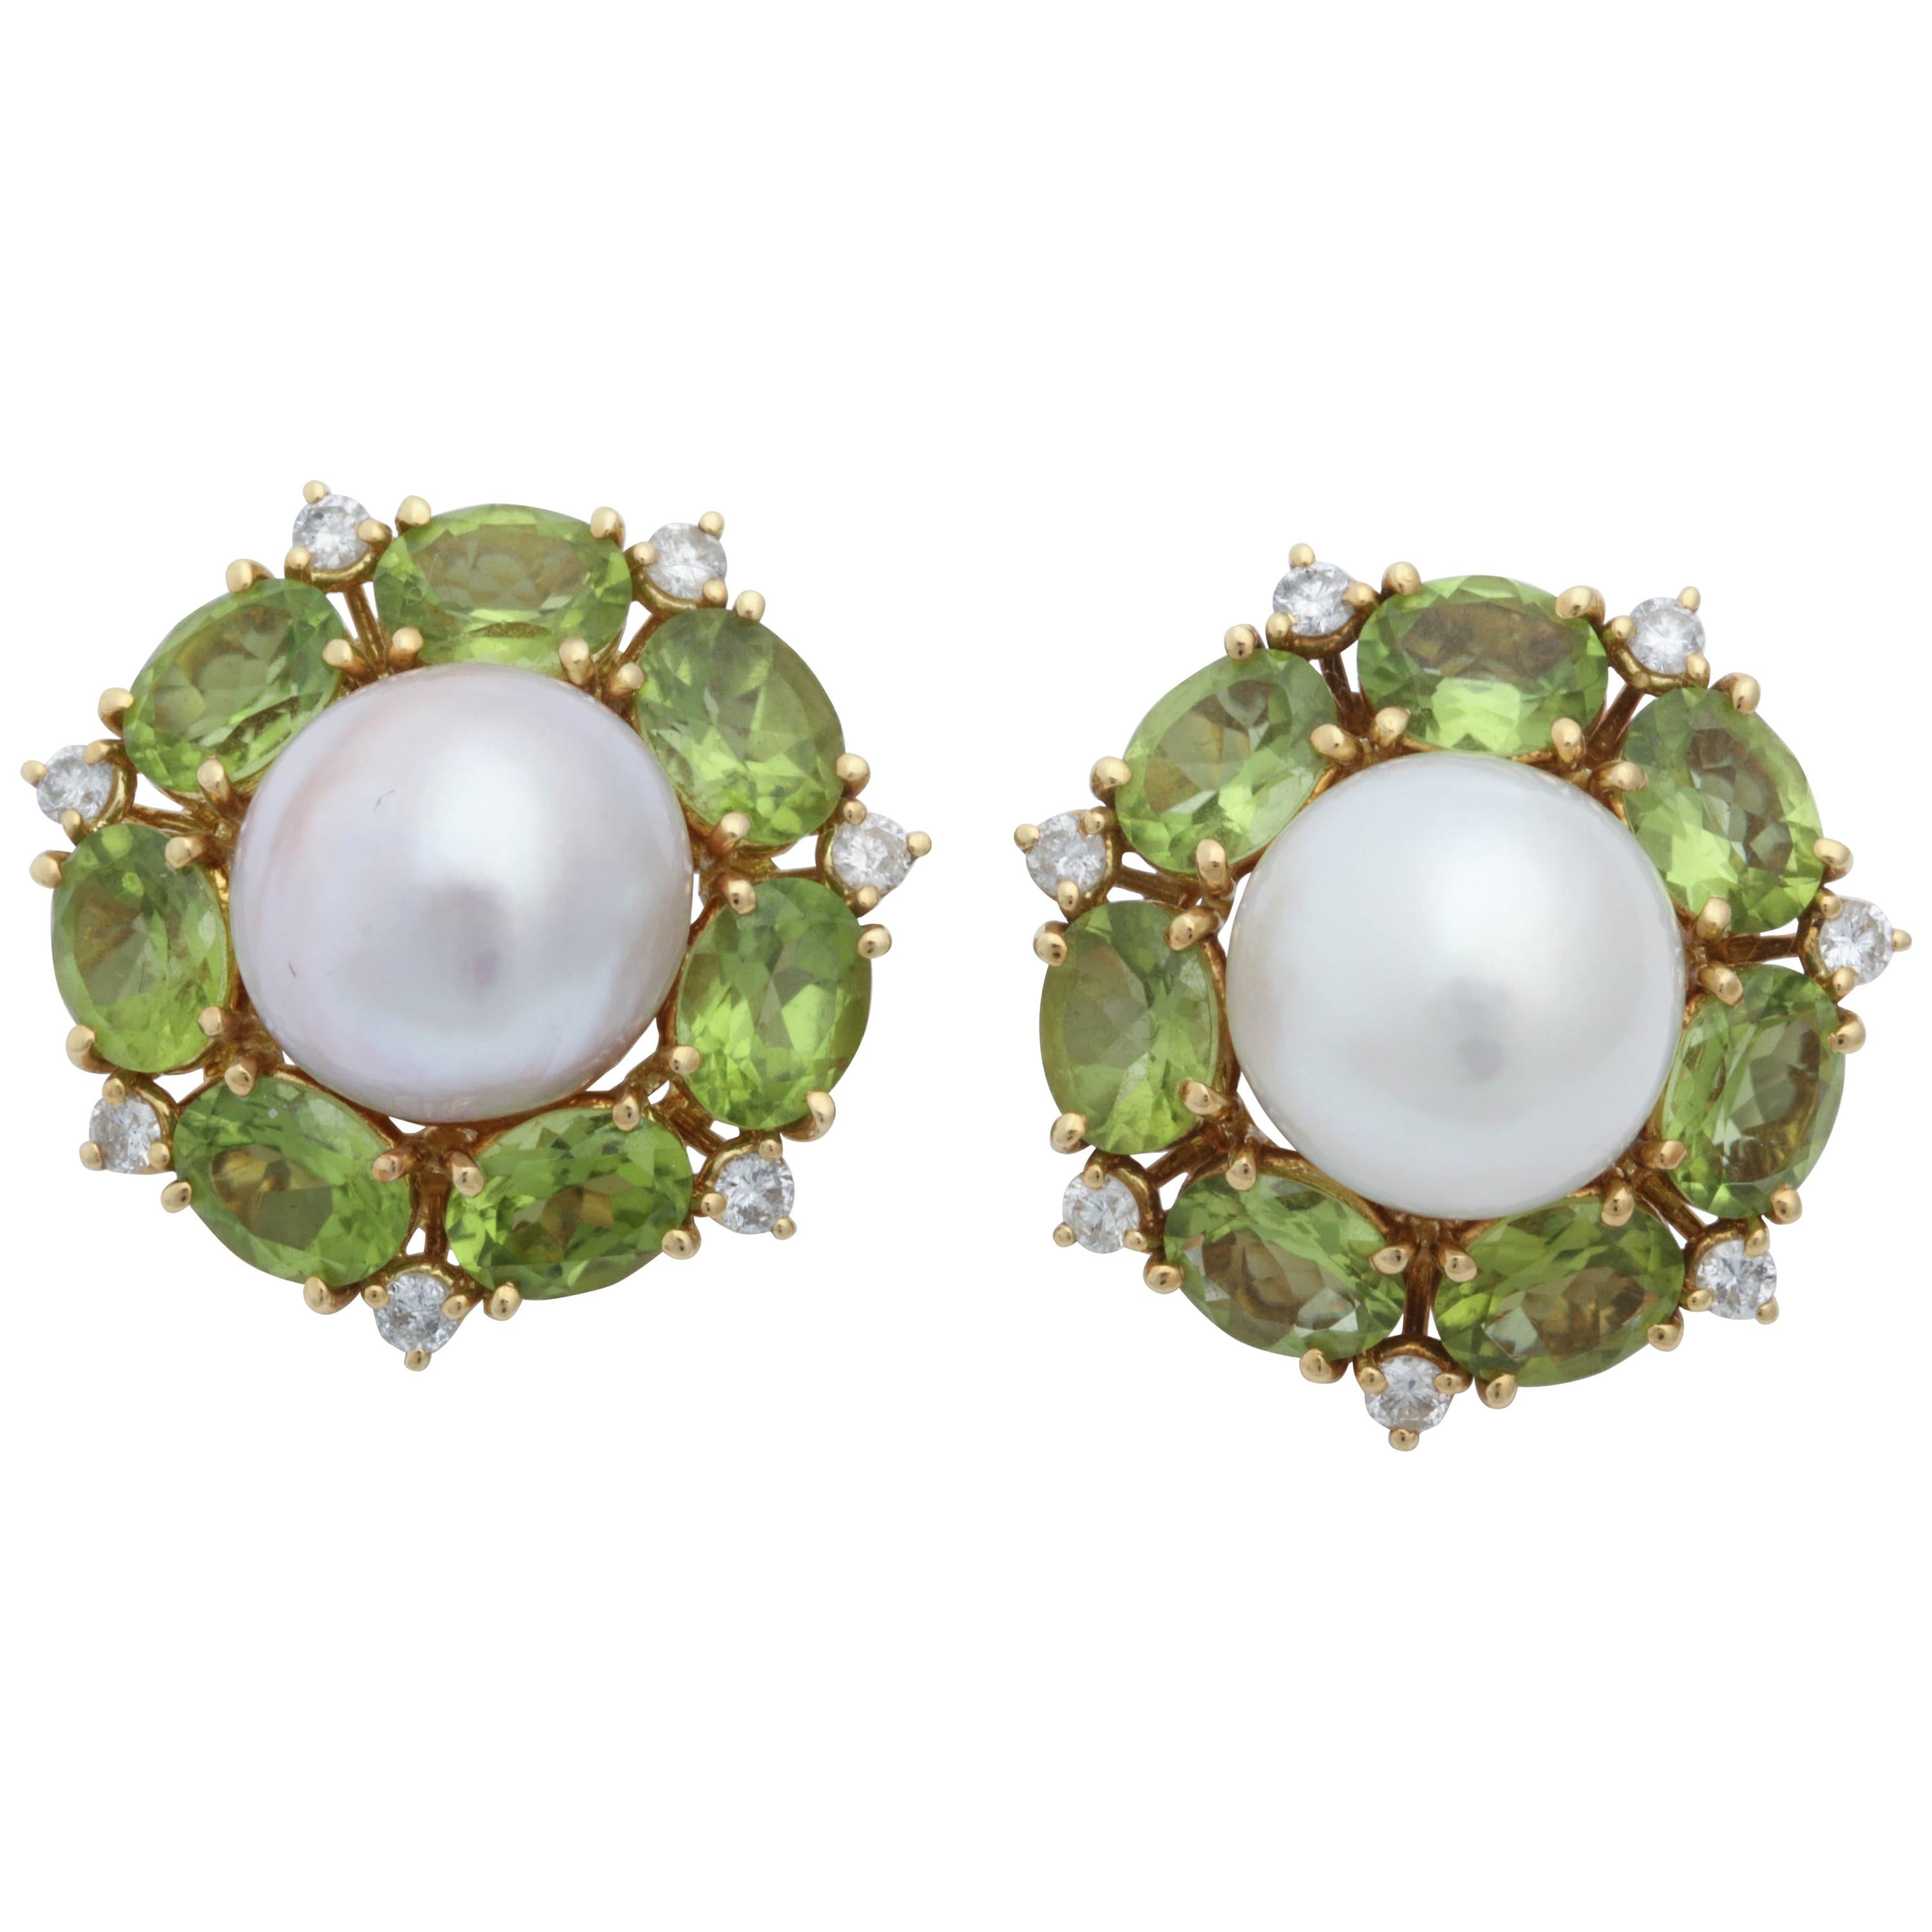 1980s Seaman Schepps South Sea Pearl with Peridots and Diamonds Earclips